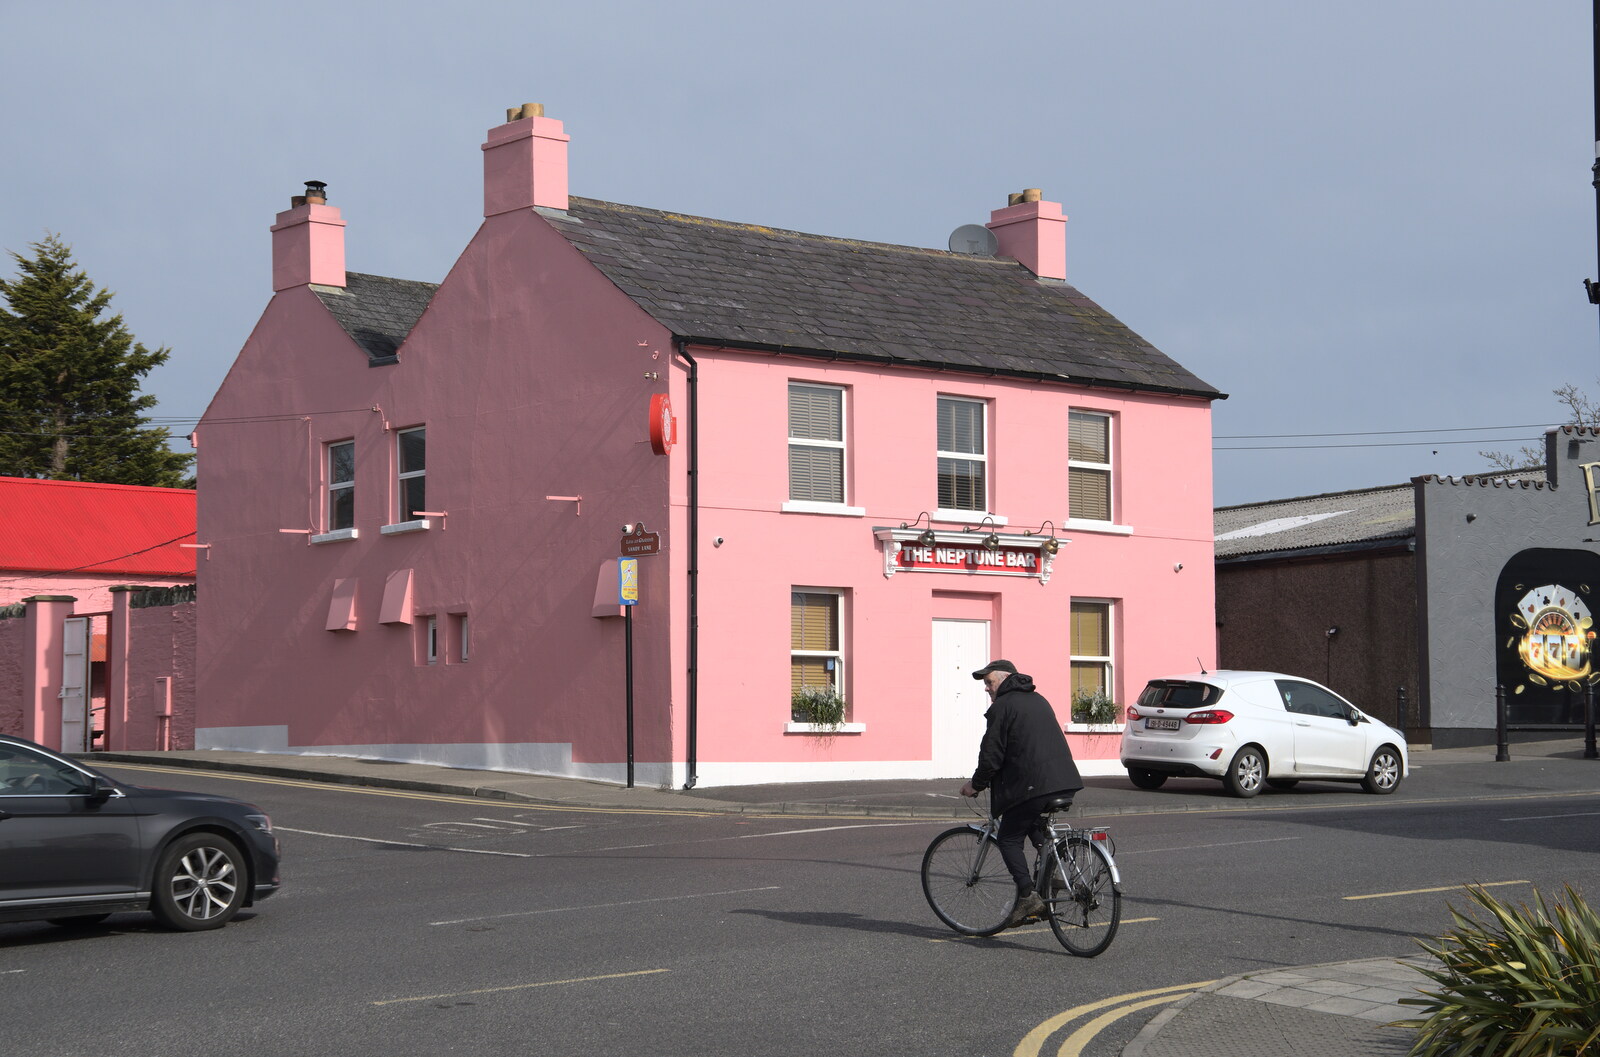 Blackrock North and South, Louth and County Dublin, Ireland - 23rd April 2022: The very pink Neptune Bar